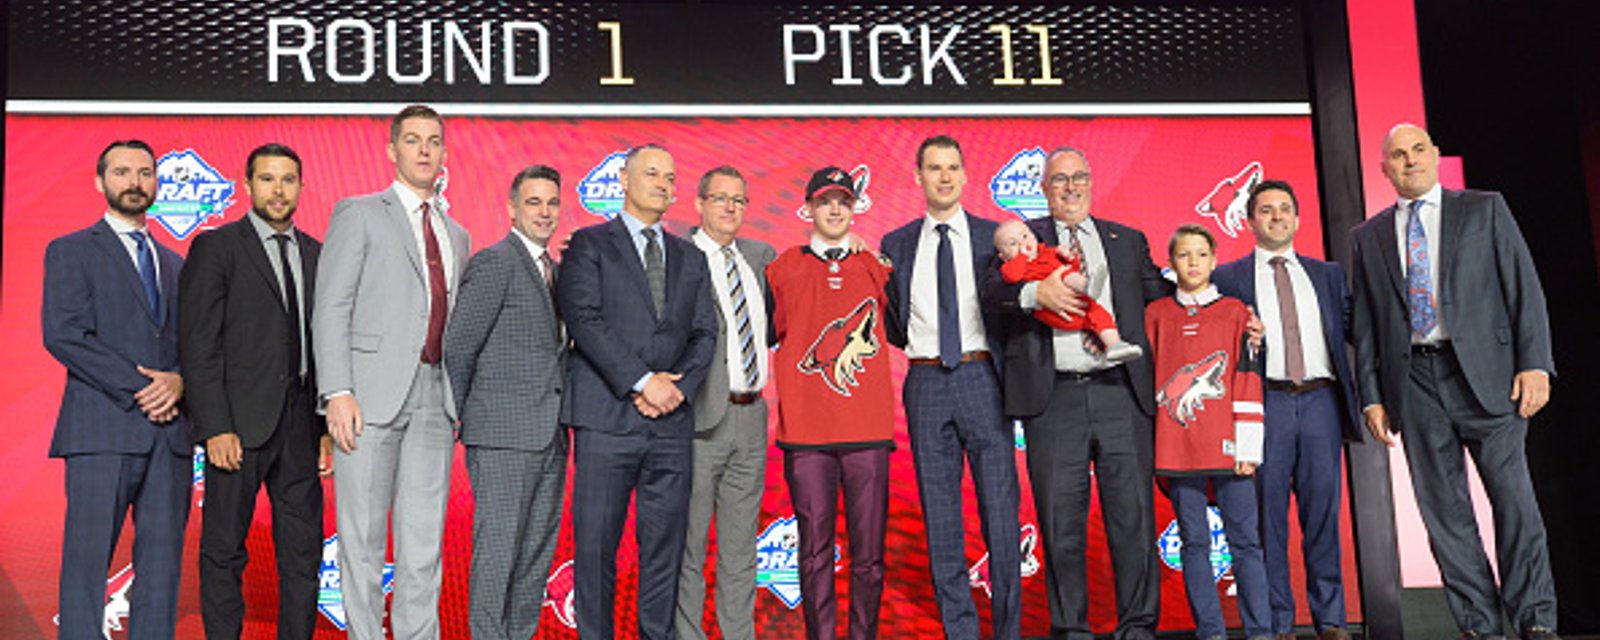 Rumour: Coyotes have appeal case to get draft picks back! 